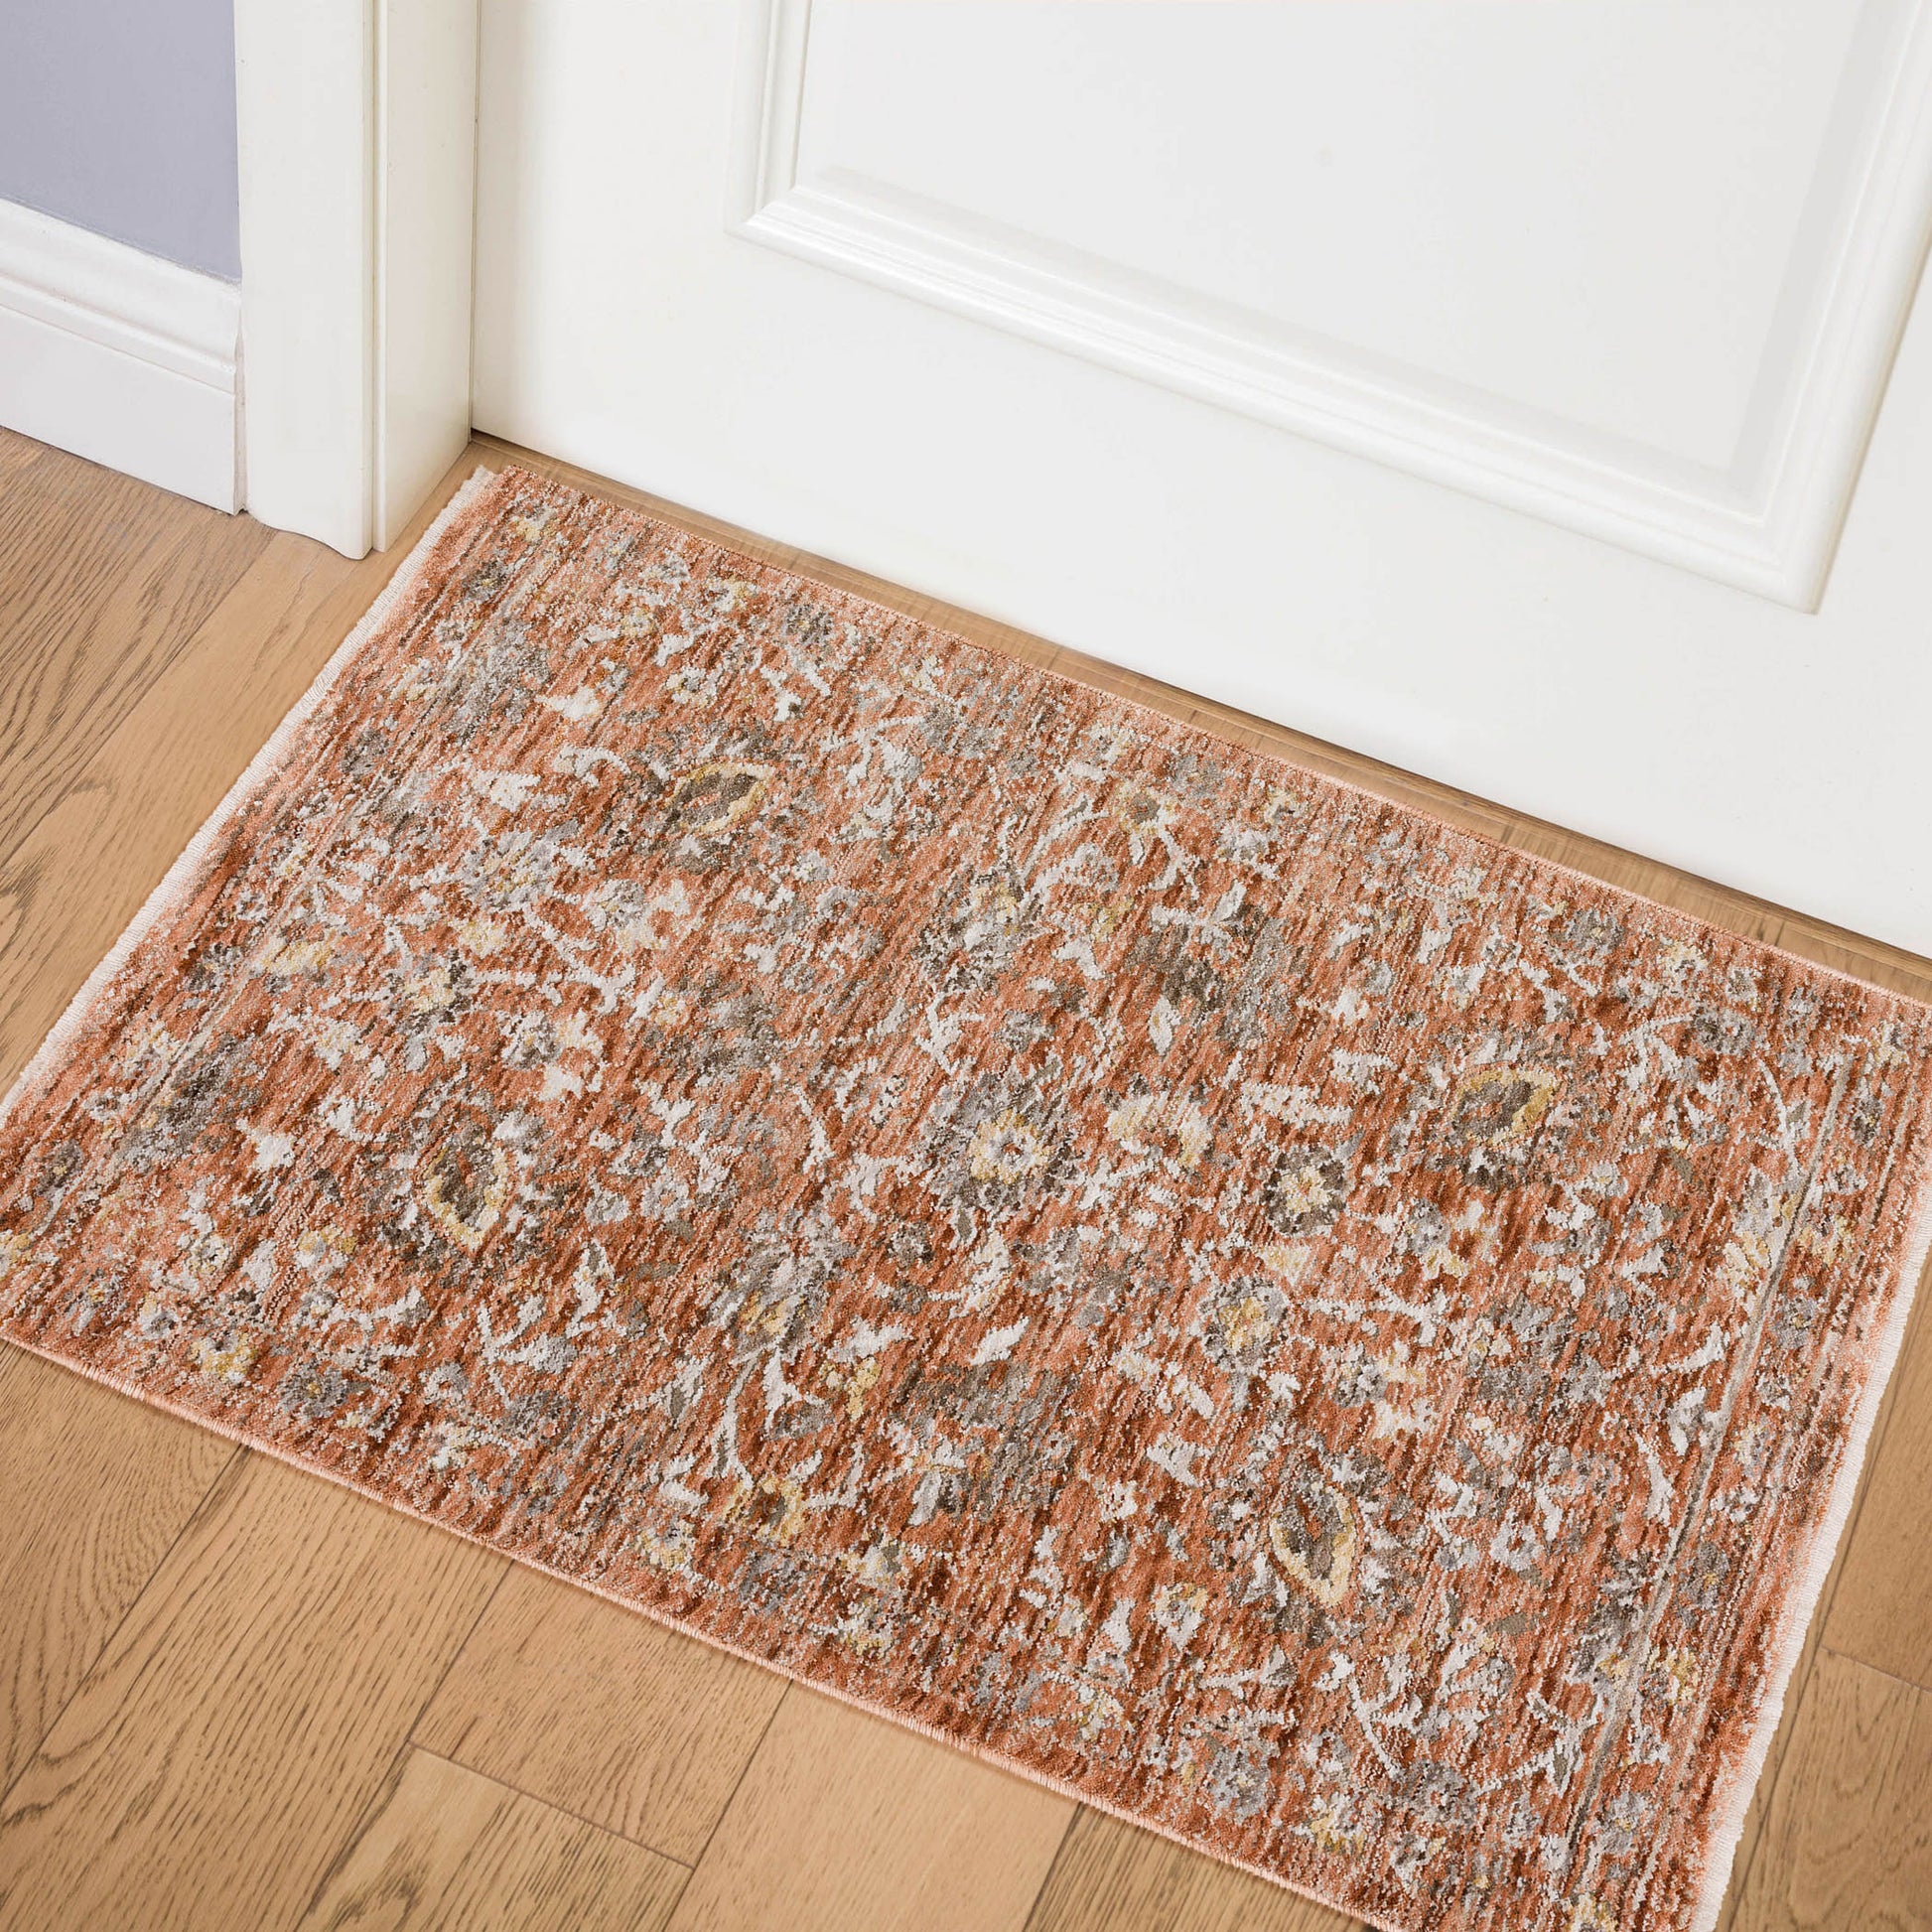 Dalyn Rugs Vienna VI9 Paprika Traditional Power Woven Rug